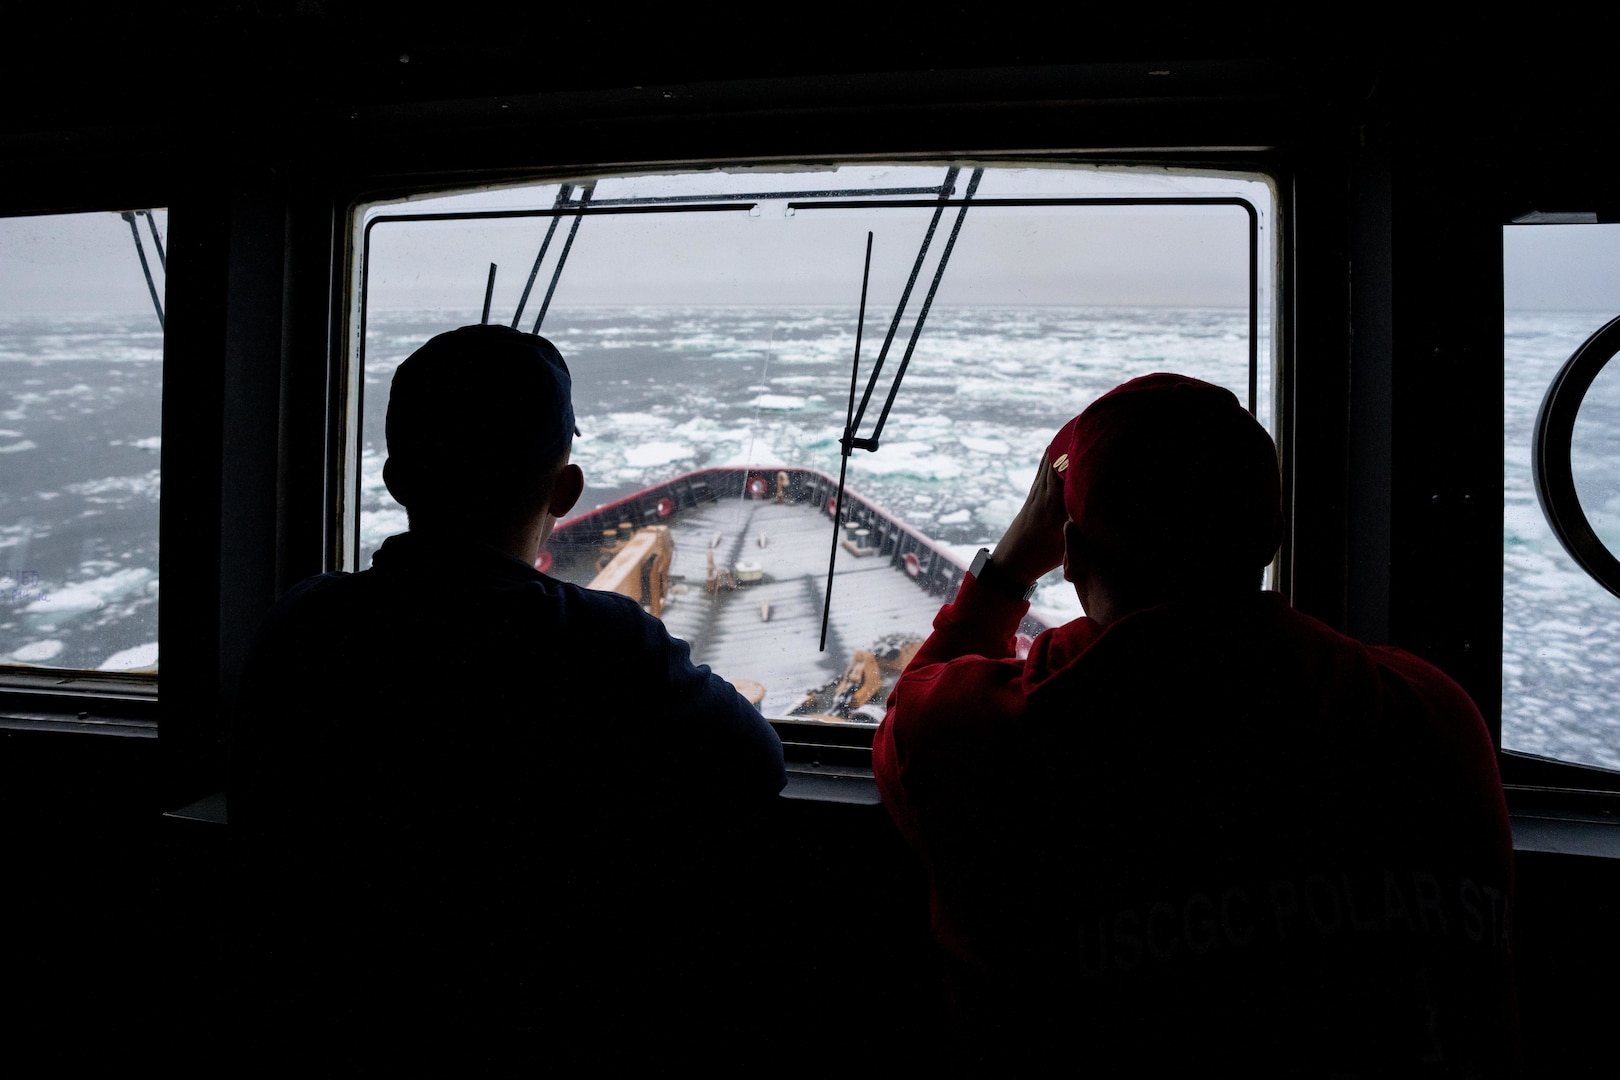 Lt. Cmdr. Donald Rudnickas, a member of the Coast Guard Icebreaking program temporarily assigned to Coast Guard Cutter Polar Star (WAGB 10), and Ensign Jonathan Kattnig, the information technology officer on the Polar Star, look out across the ice in the Southern Ocean, Dec. 25, 2022. The Coast Guard Cutter Polar Star first arrived in the pack ice on Christmas Day. Polar Star is en route to Antarctica in support of Operation Deep Freeze, a joint service, inter-agency support operation for the National Science Foundation, which manages the United States Antarctic Program. (U.S. Coast Guard photo by Petty Officer 3rd Class Aidan Cooney)